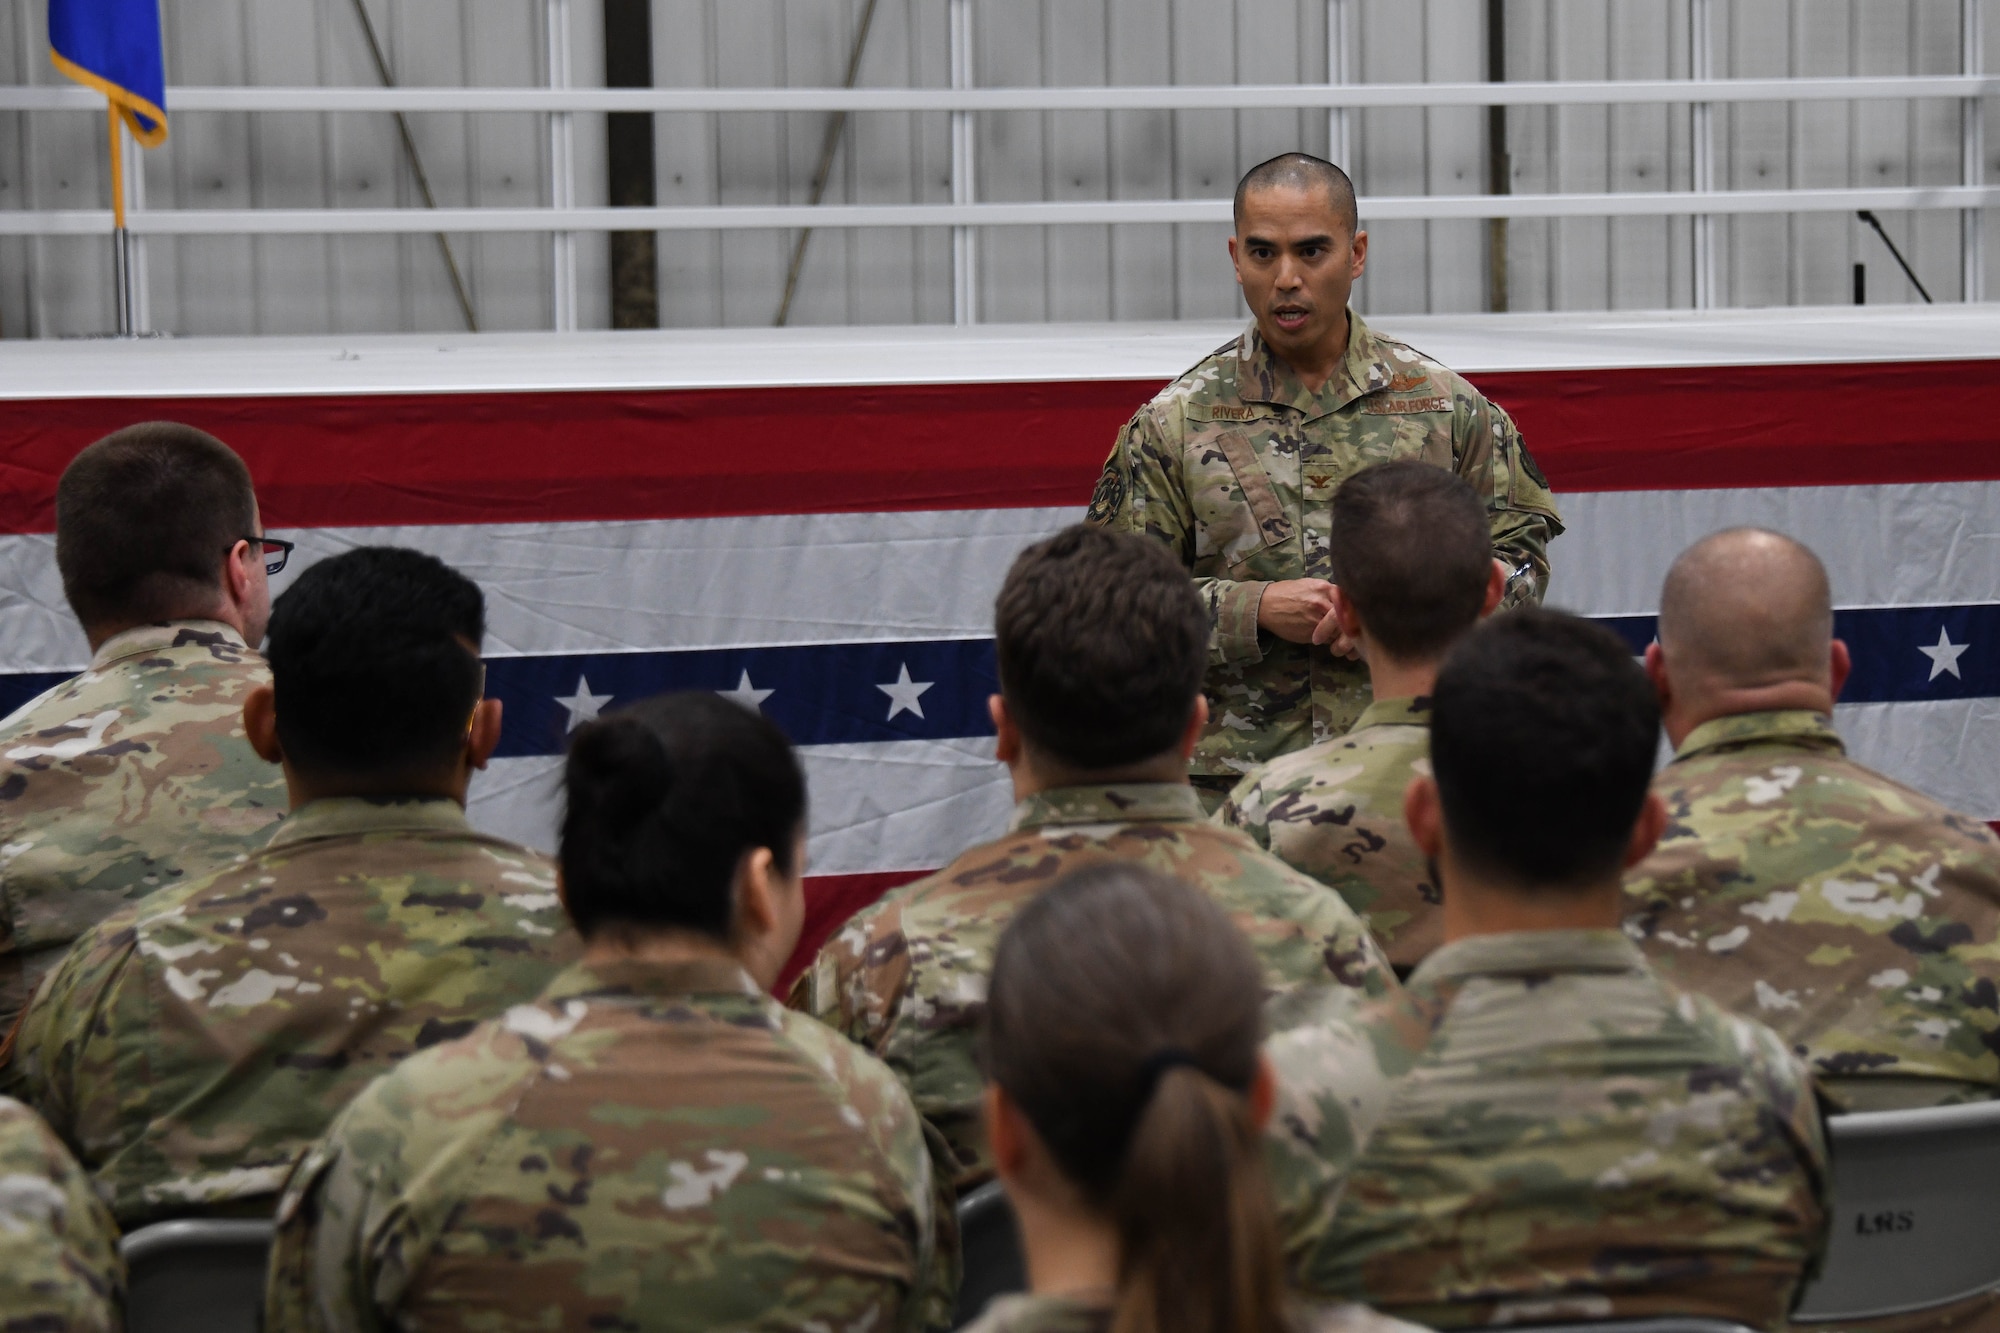 A man in a military uniform talks to a group of military members.